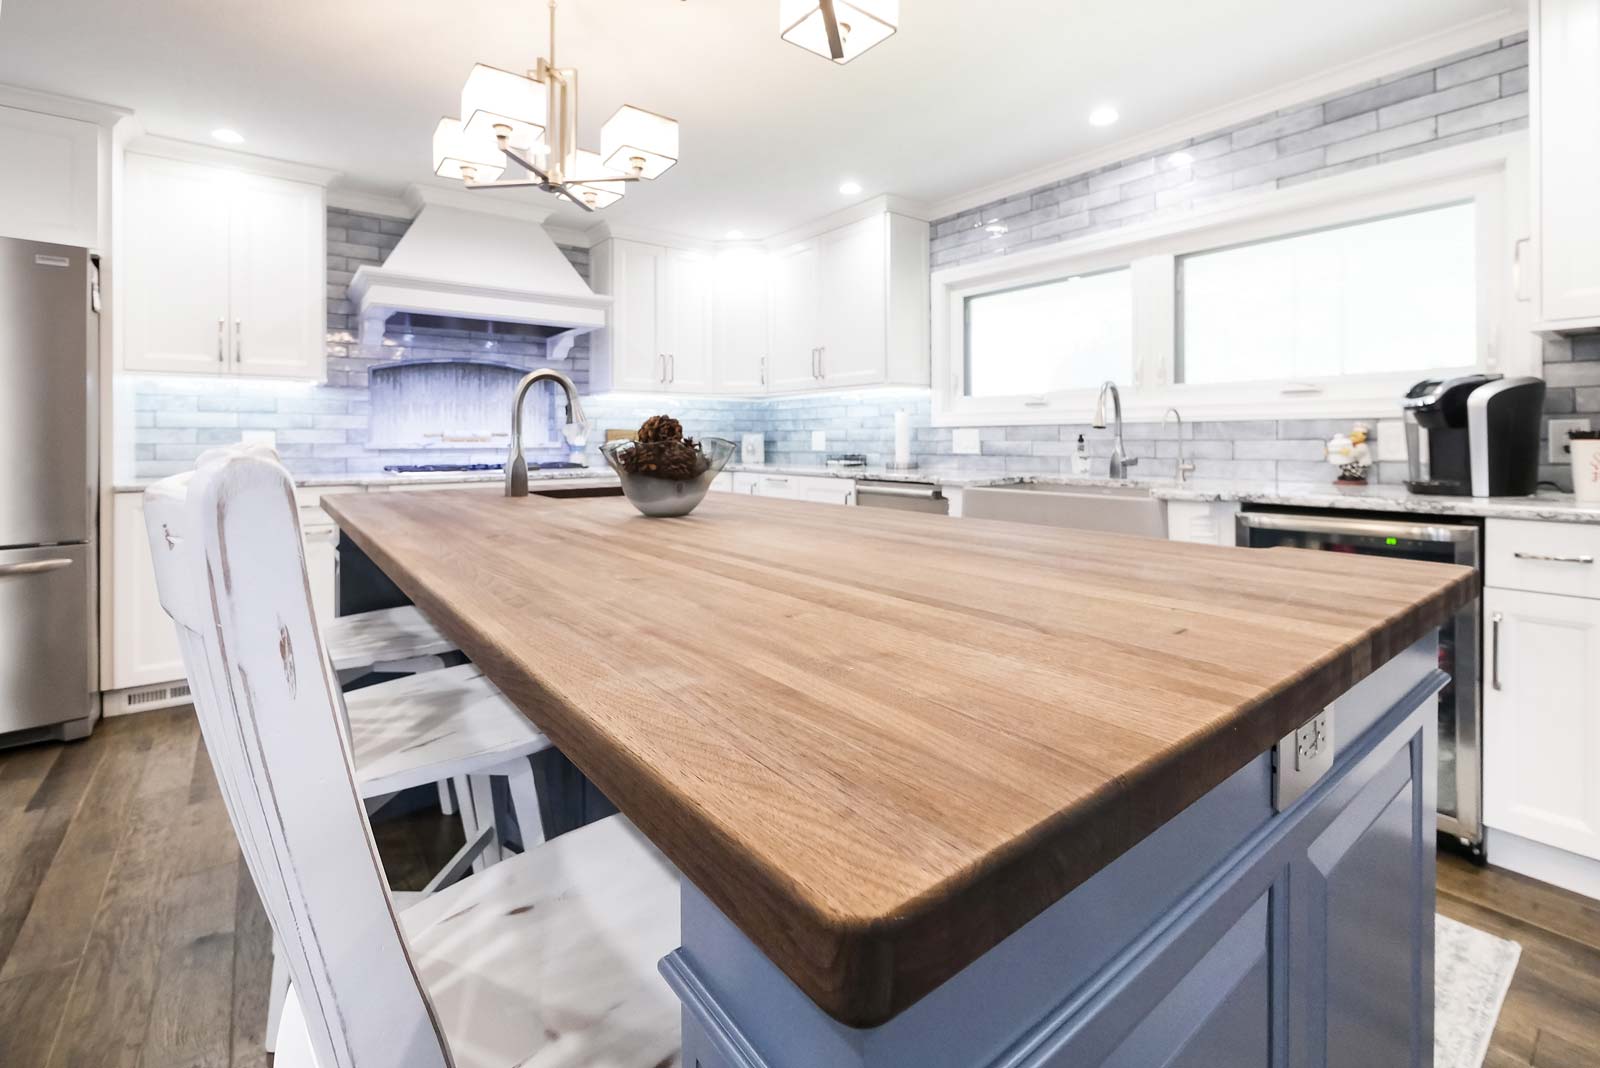 Kitchen island with solid wooden countertop and a sink.